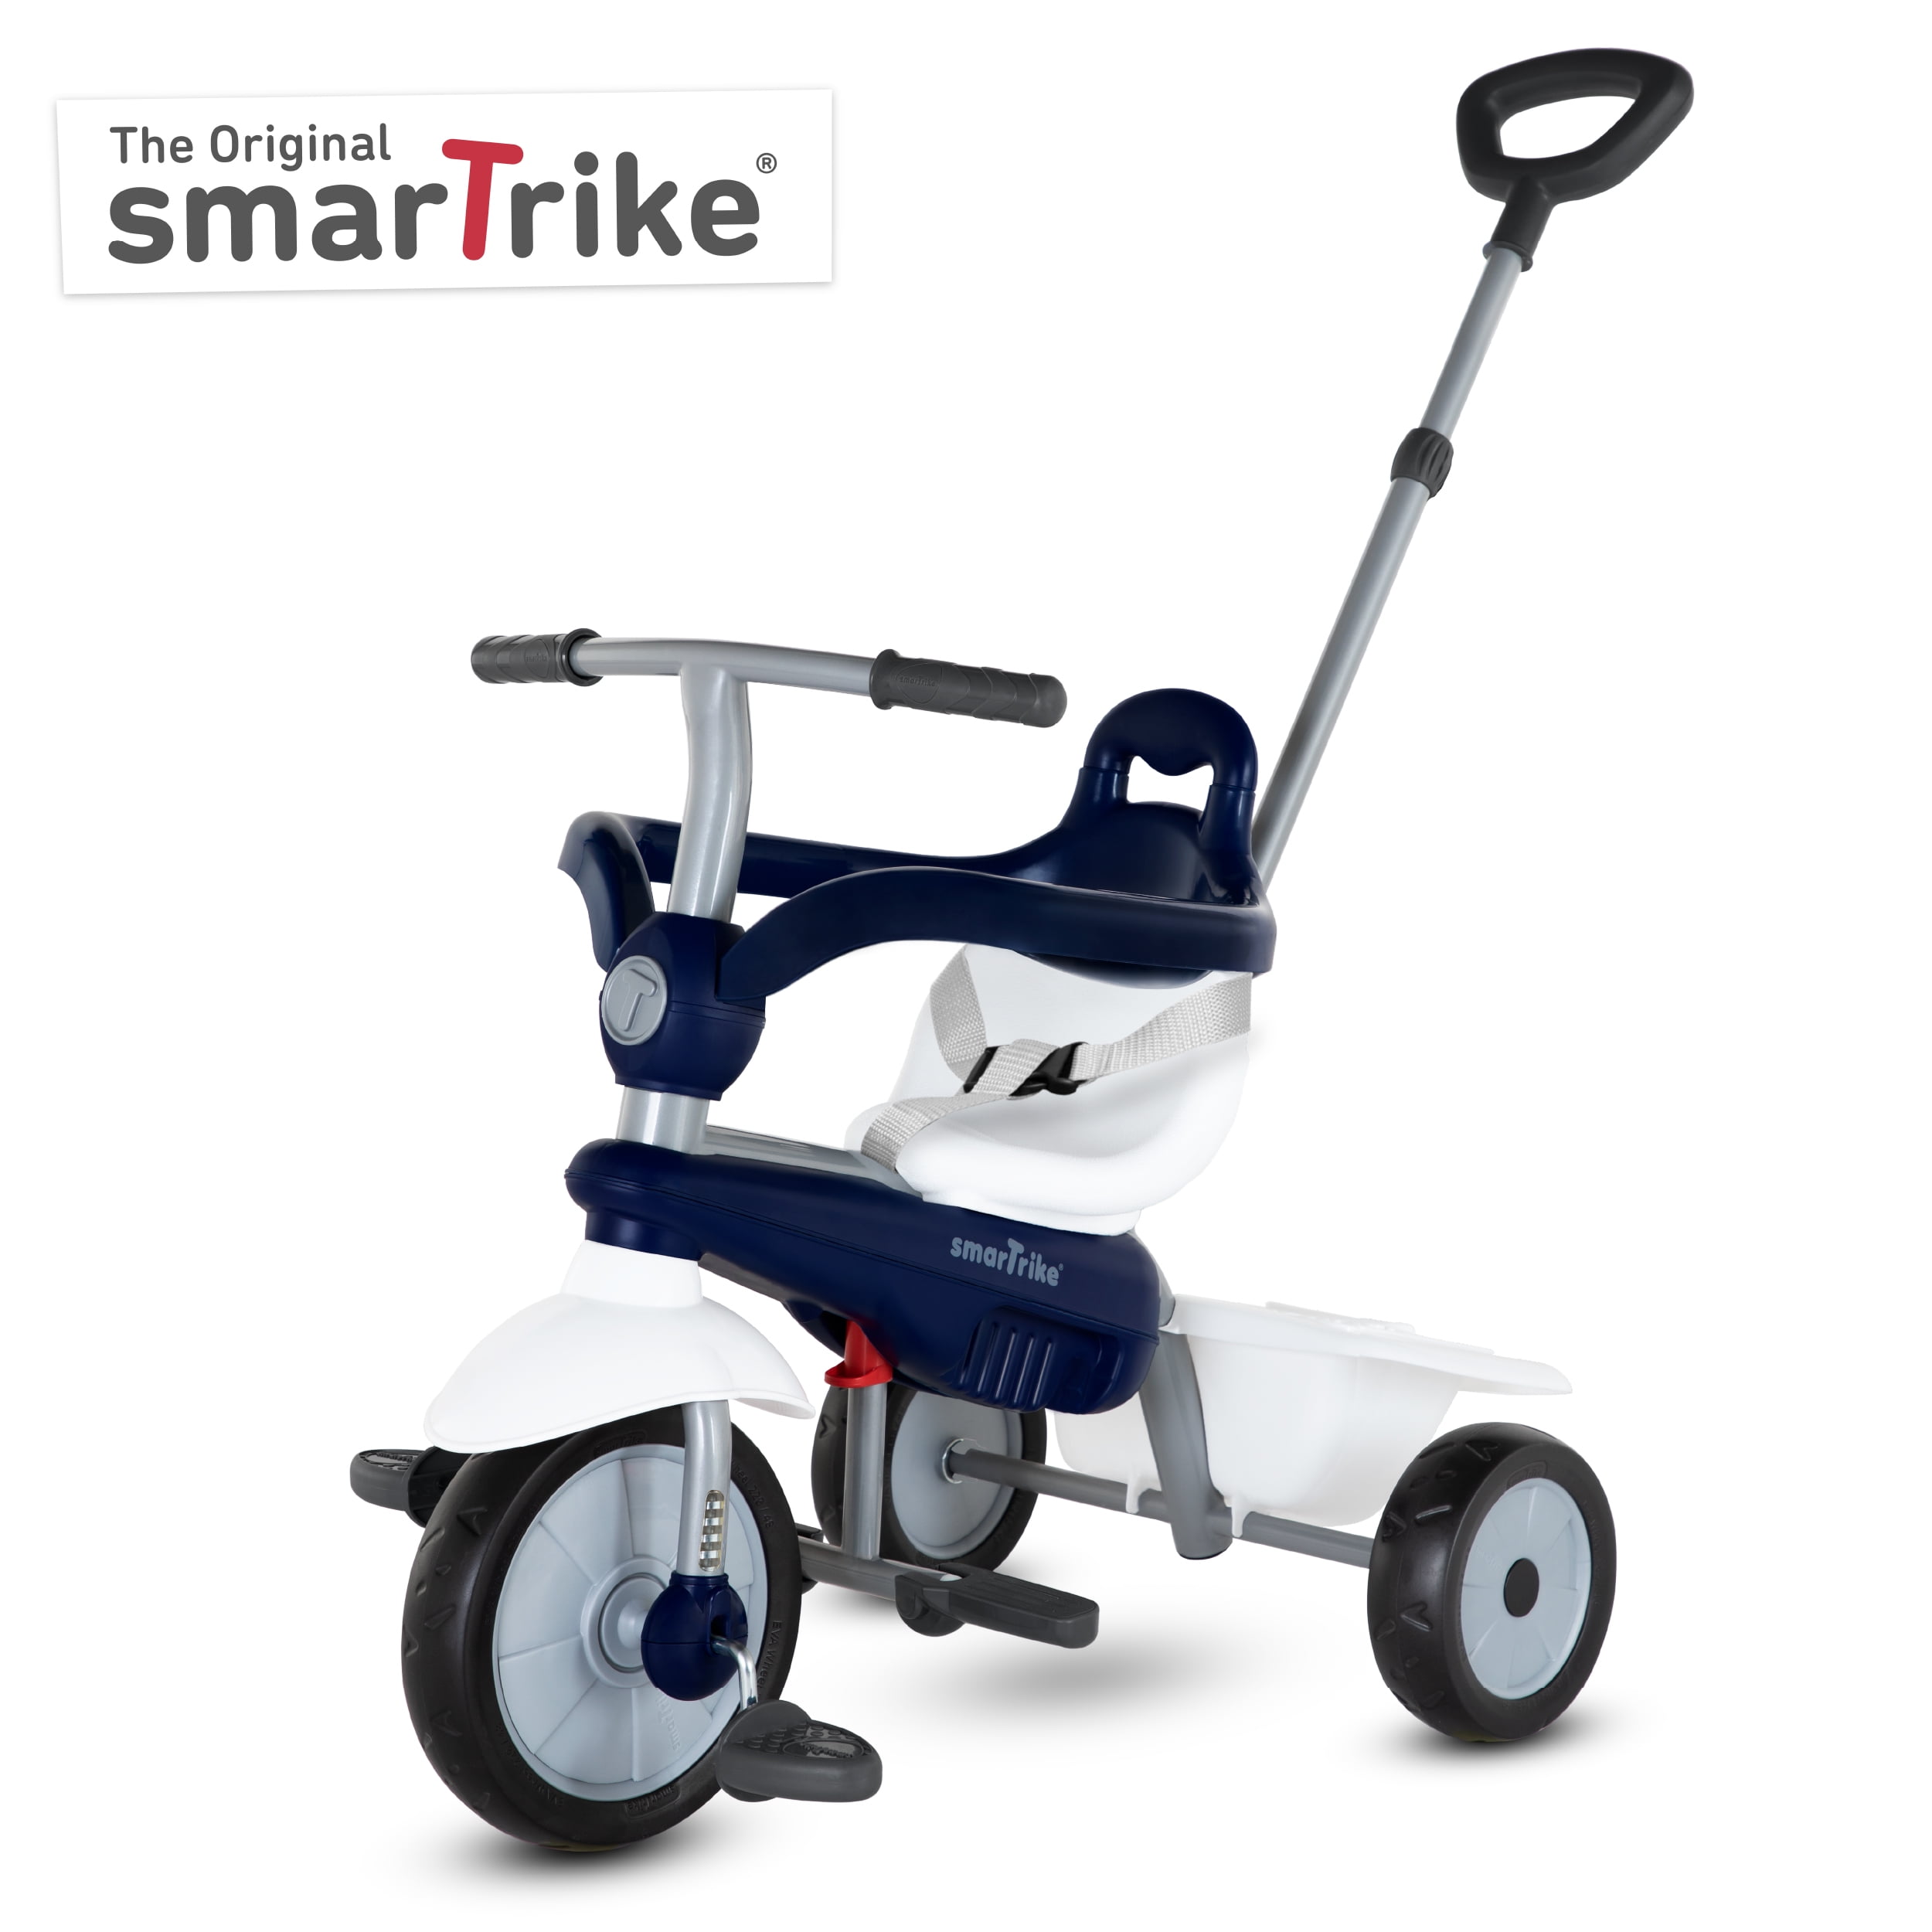 Toddler Lollipop 3-in-1 smarTrike Tricycle